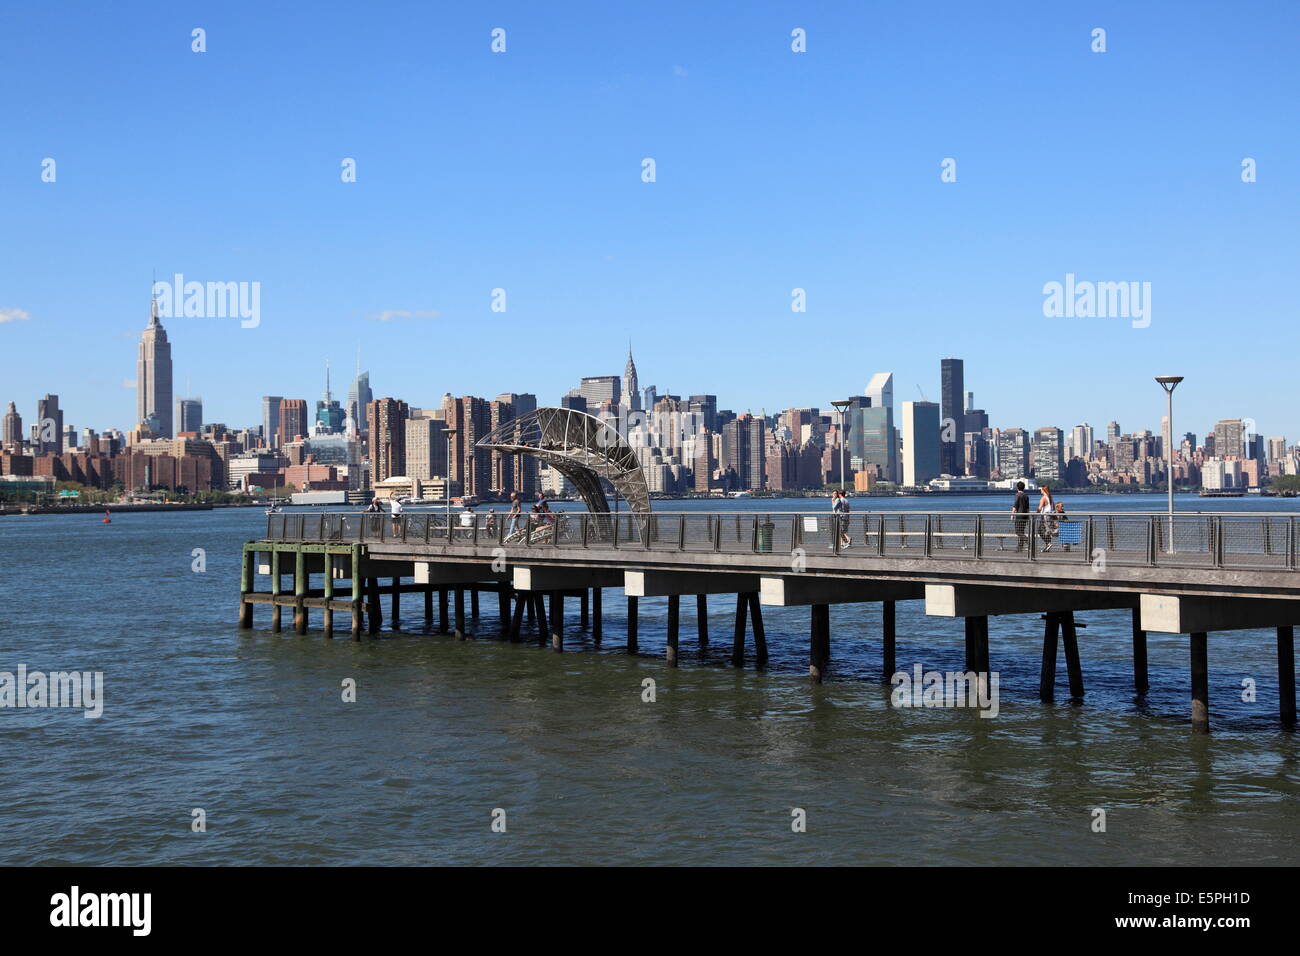 Northside Piers, East River, view of Manhattan skyline, Williamsburg, Brooklyn, New York City, United States of America Stock Photo